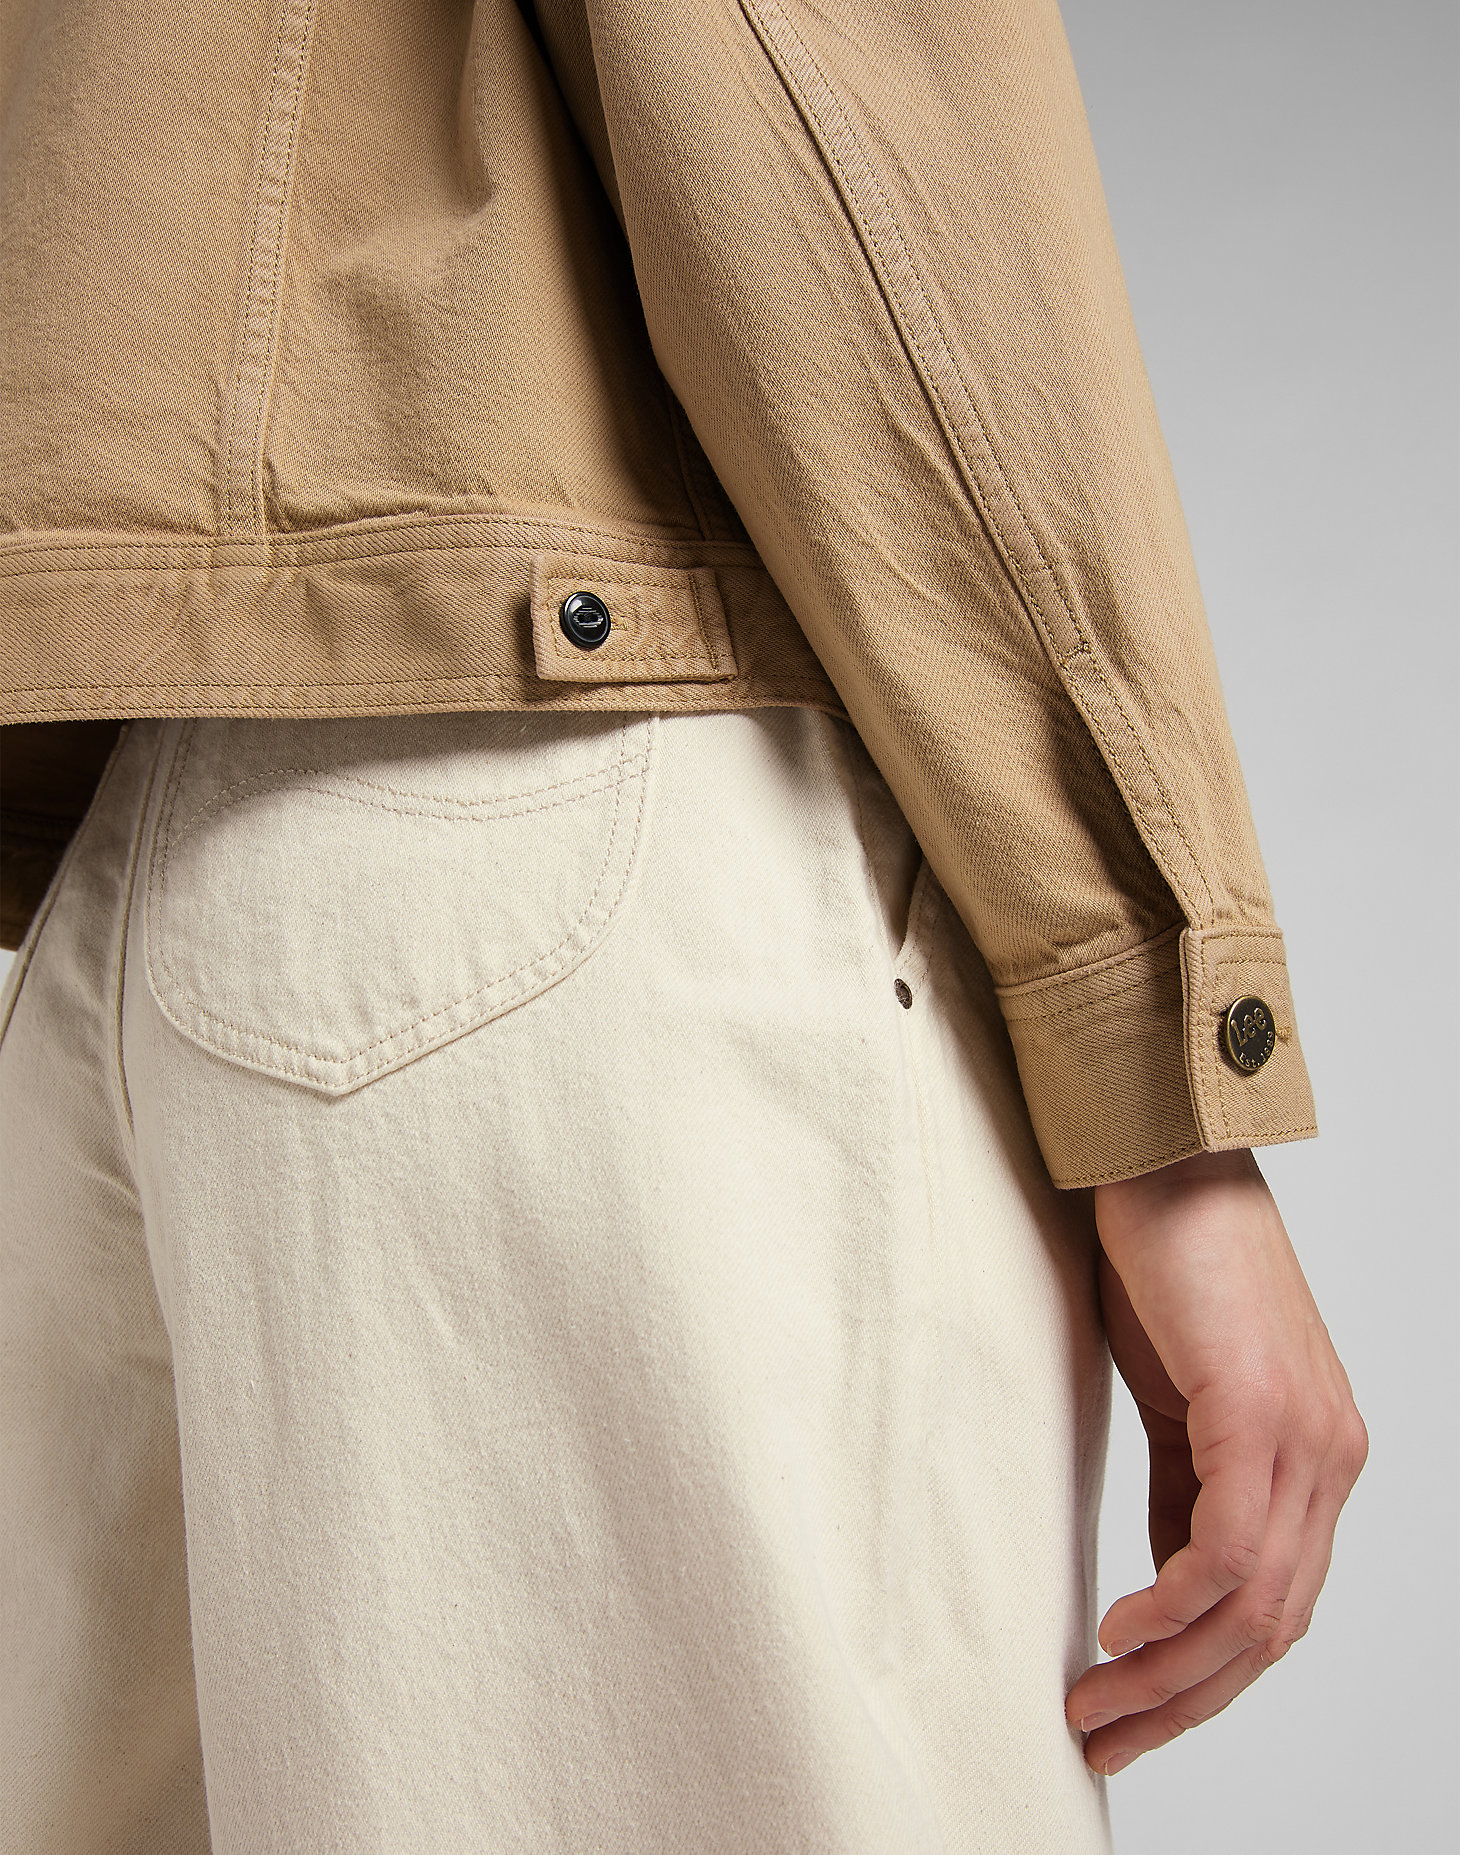 Relaxed Service Jacket in Stone Grey alternative view 6